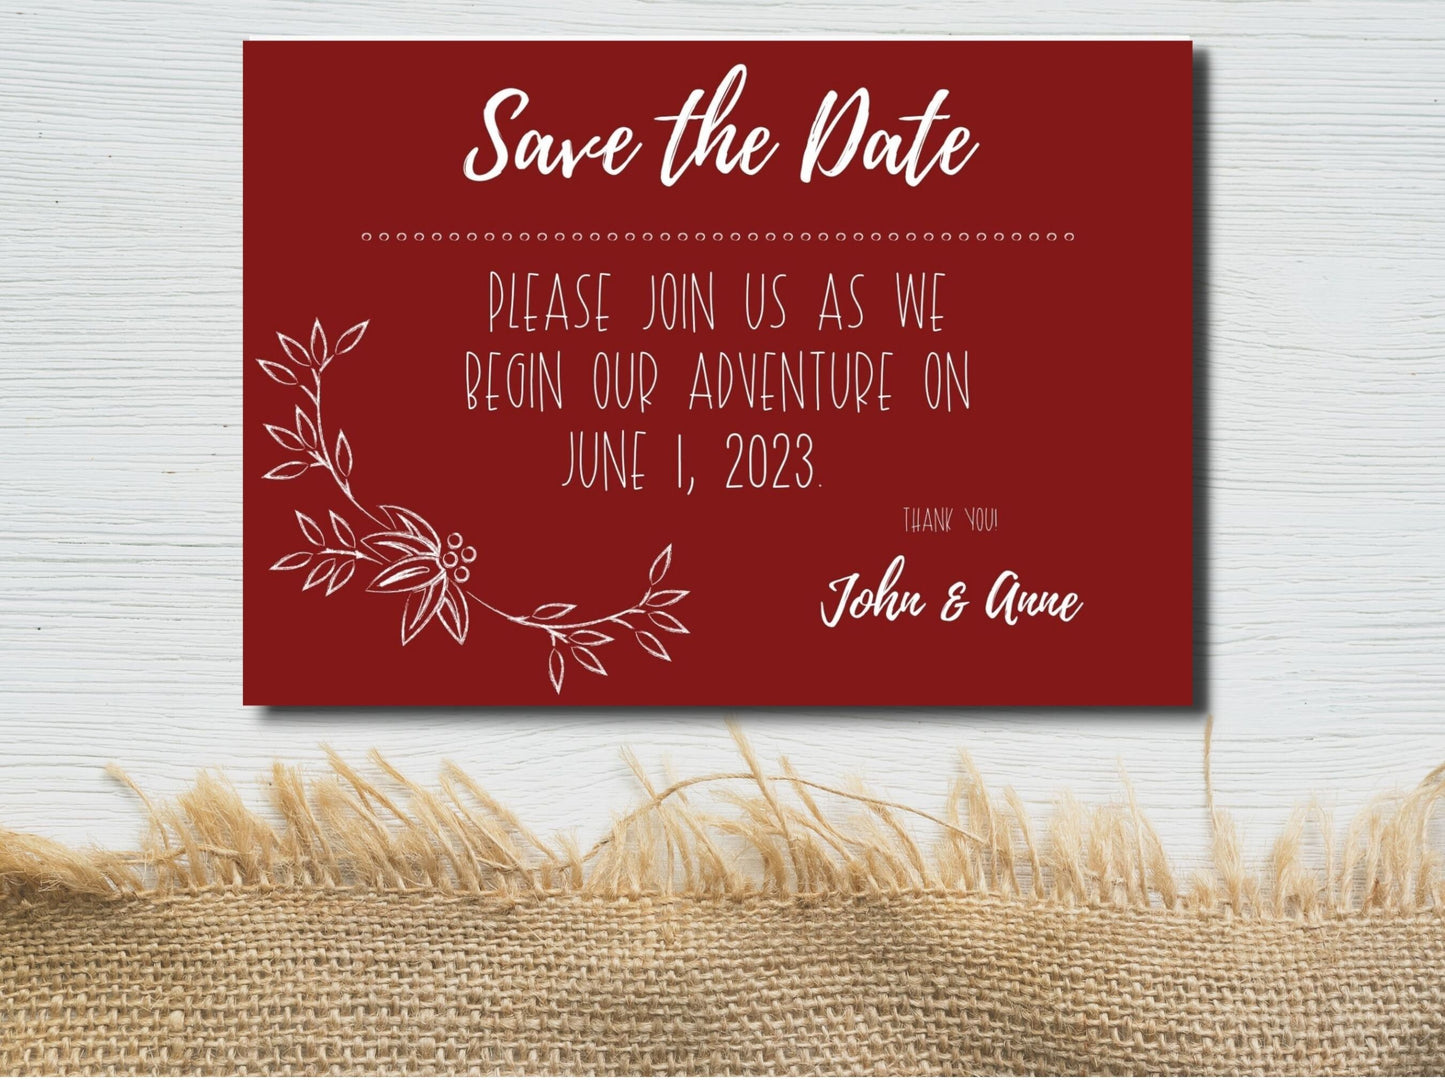 Elegant Mahogany Save the Date Cards for Fall Weddings in Stunning Jewel Tones